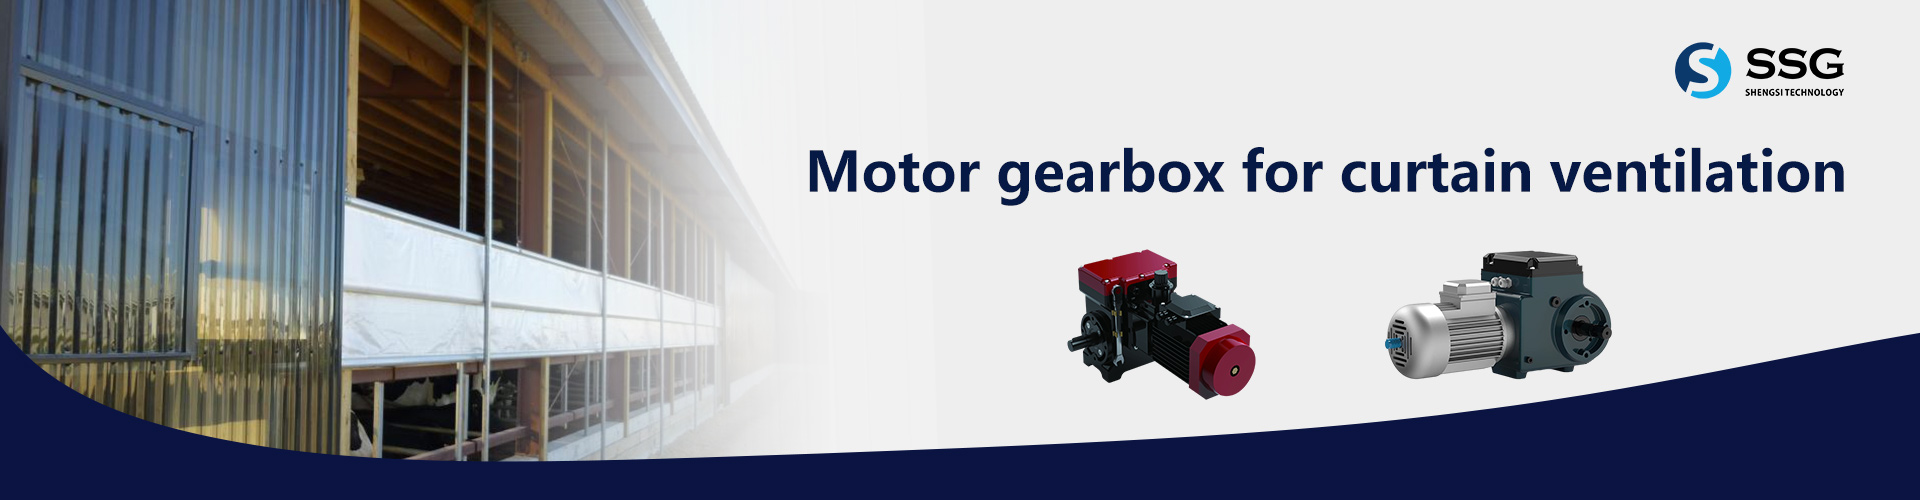 MOTOR-GEARBOX-FOR-CURTAIN-VENTILATION-banner